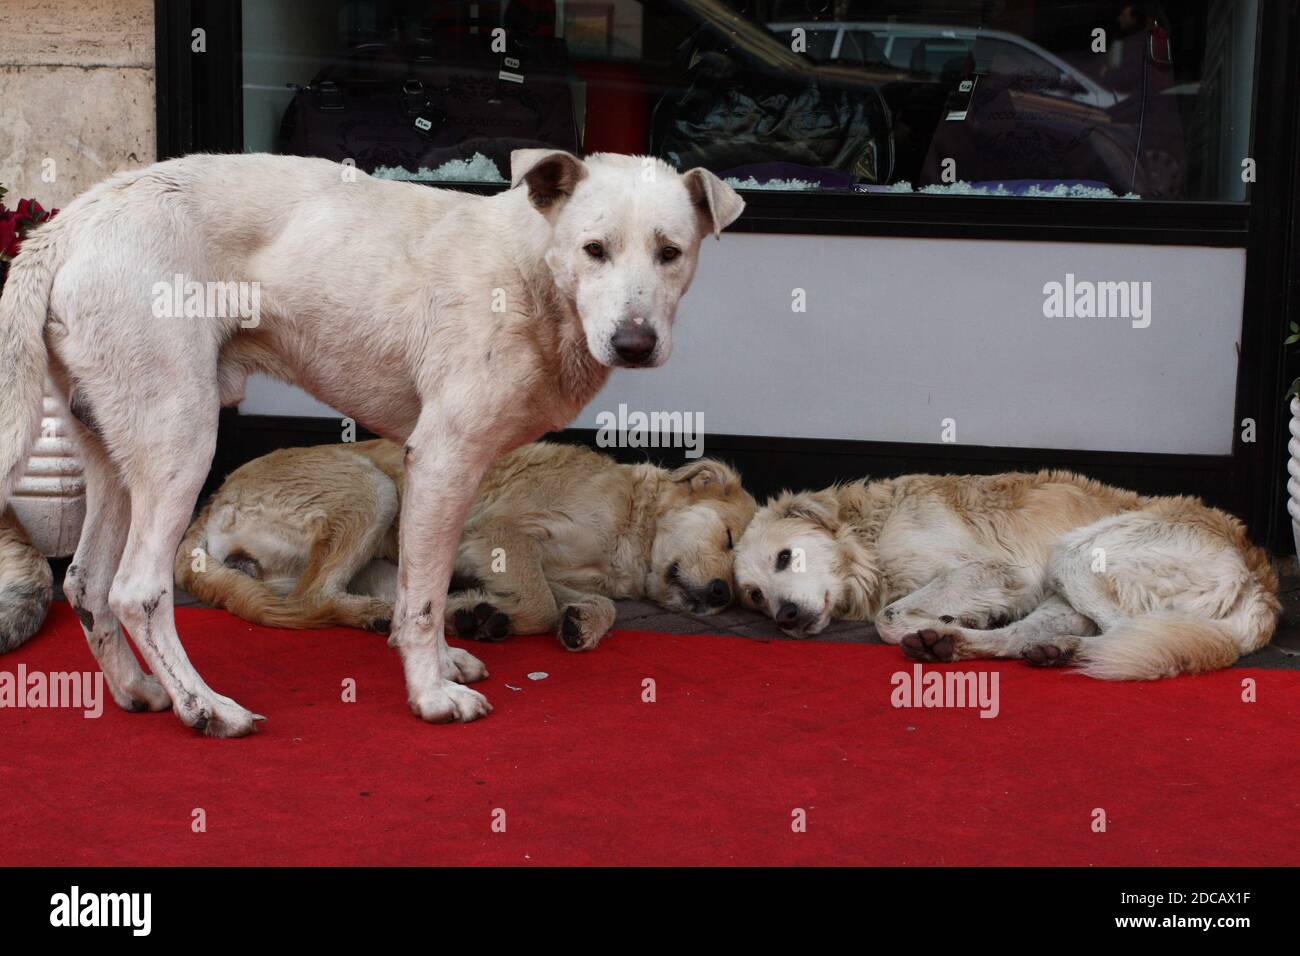 stray dogs in the street in front of the shop windows Stock Photo